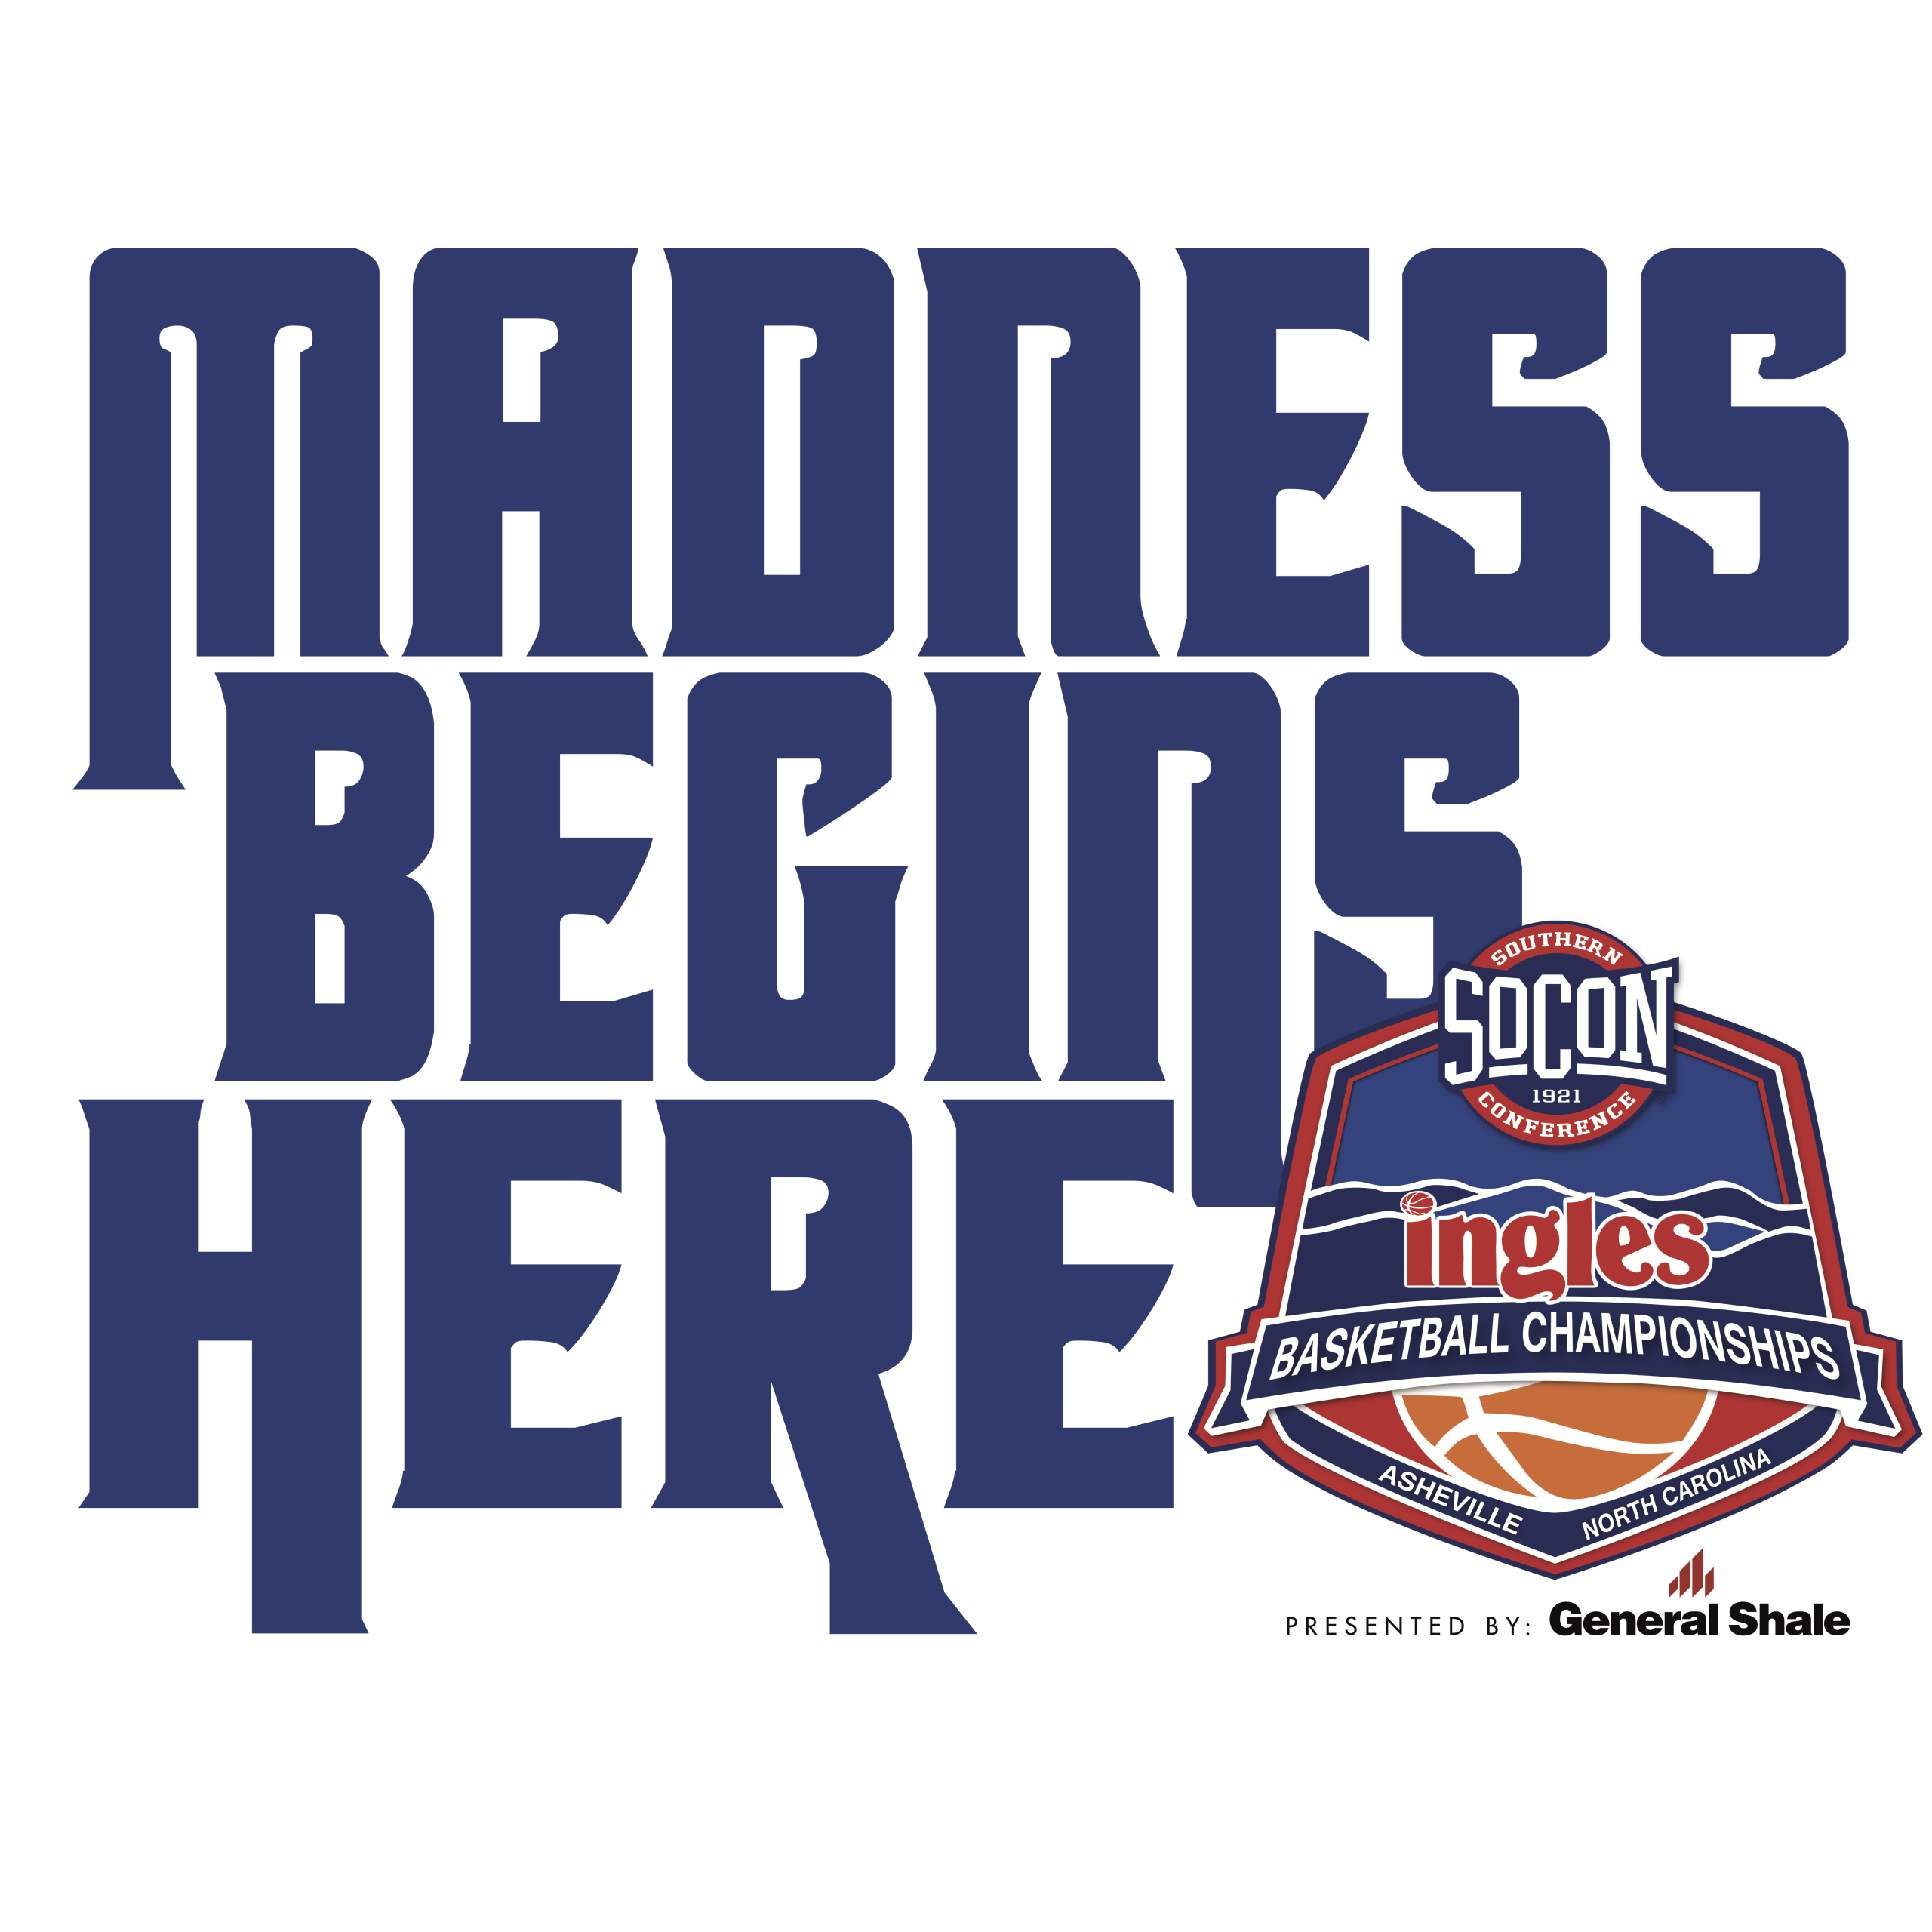 The 2020 Ingles Southern Conference Basketball Tournament